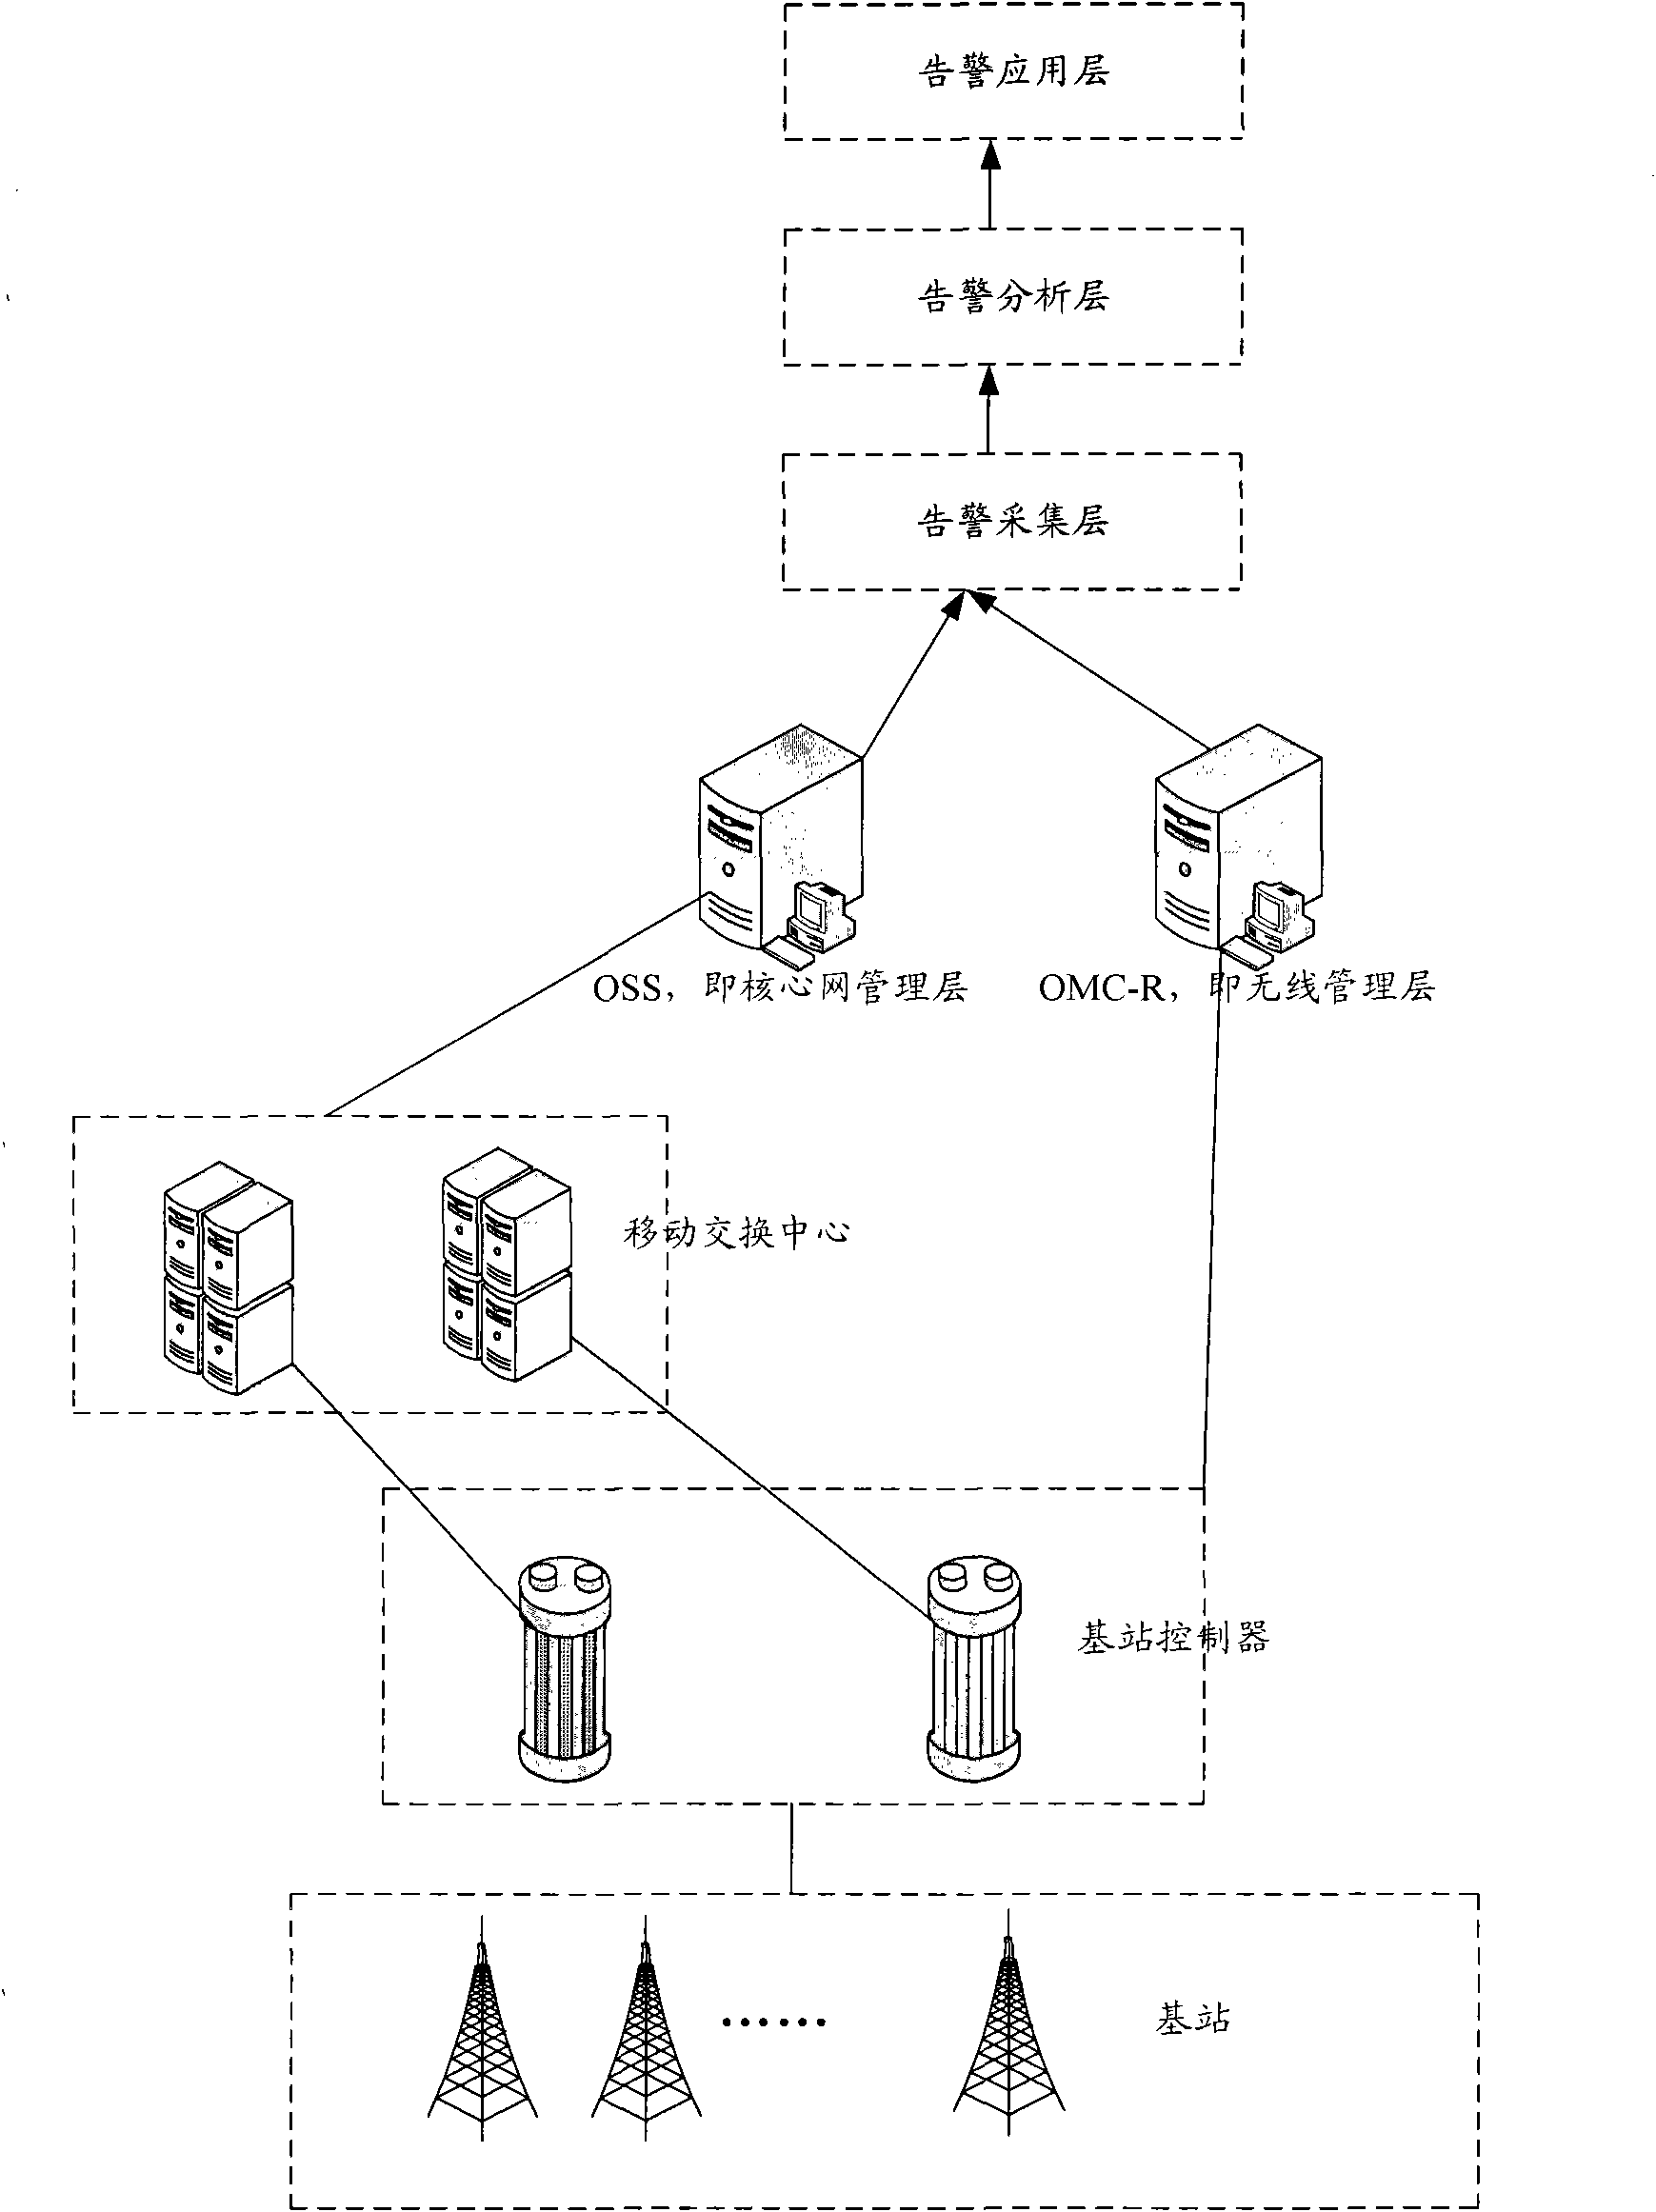 Alarm information processing method, device and system